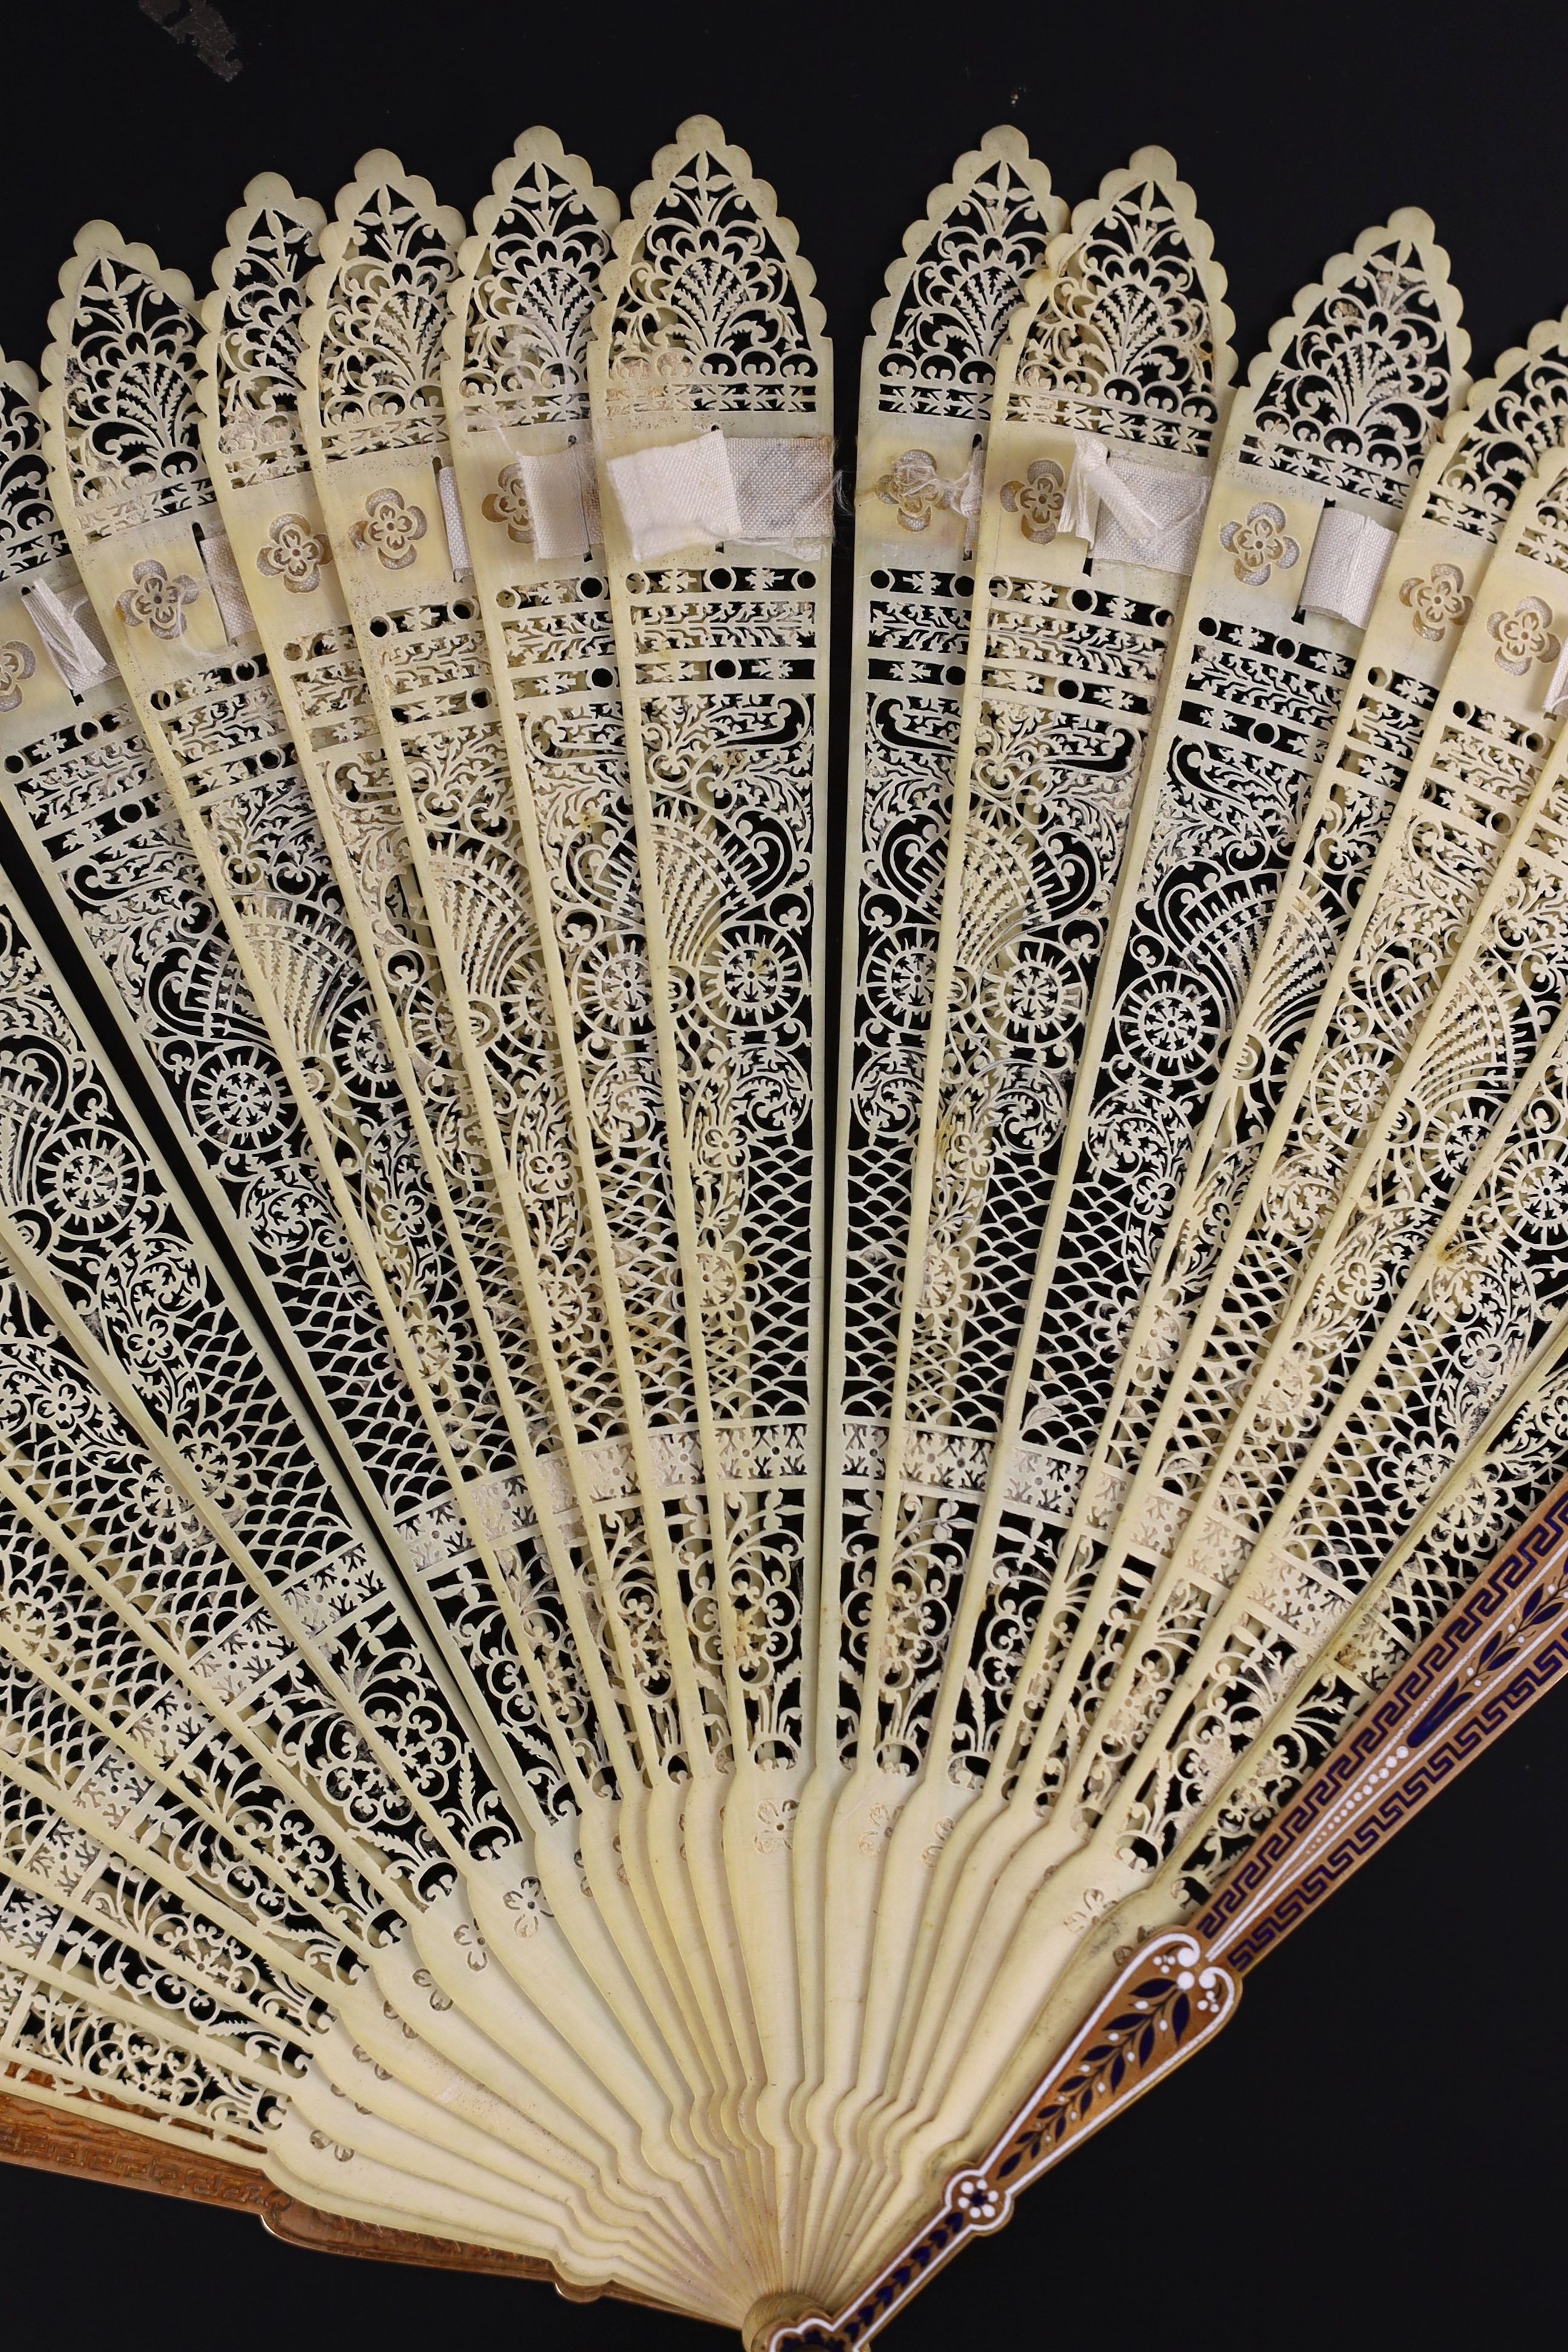 A German or Swiss gold, enamel and ivory brise fan, 19th century, possibly made for the Ottoman market, 17.3 cm closed, slight losses to sticks, needs rethreading